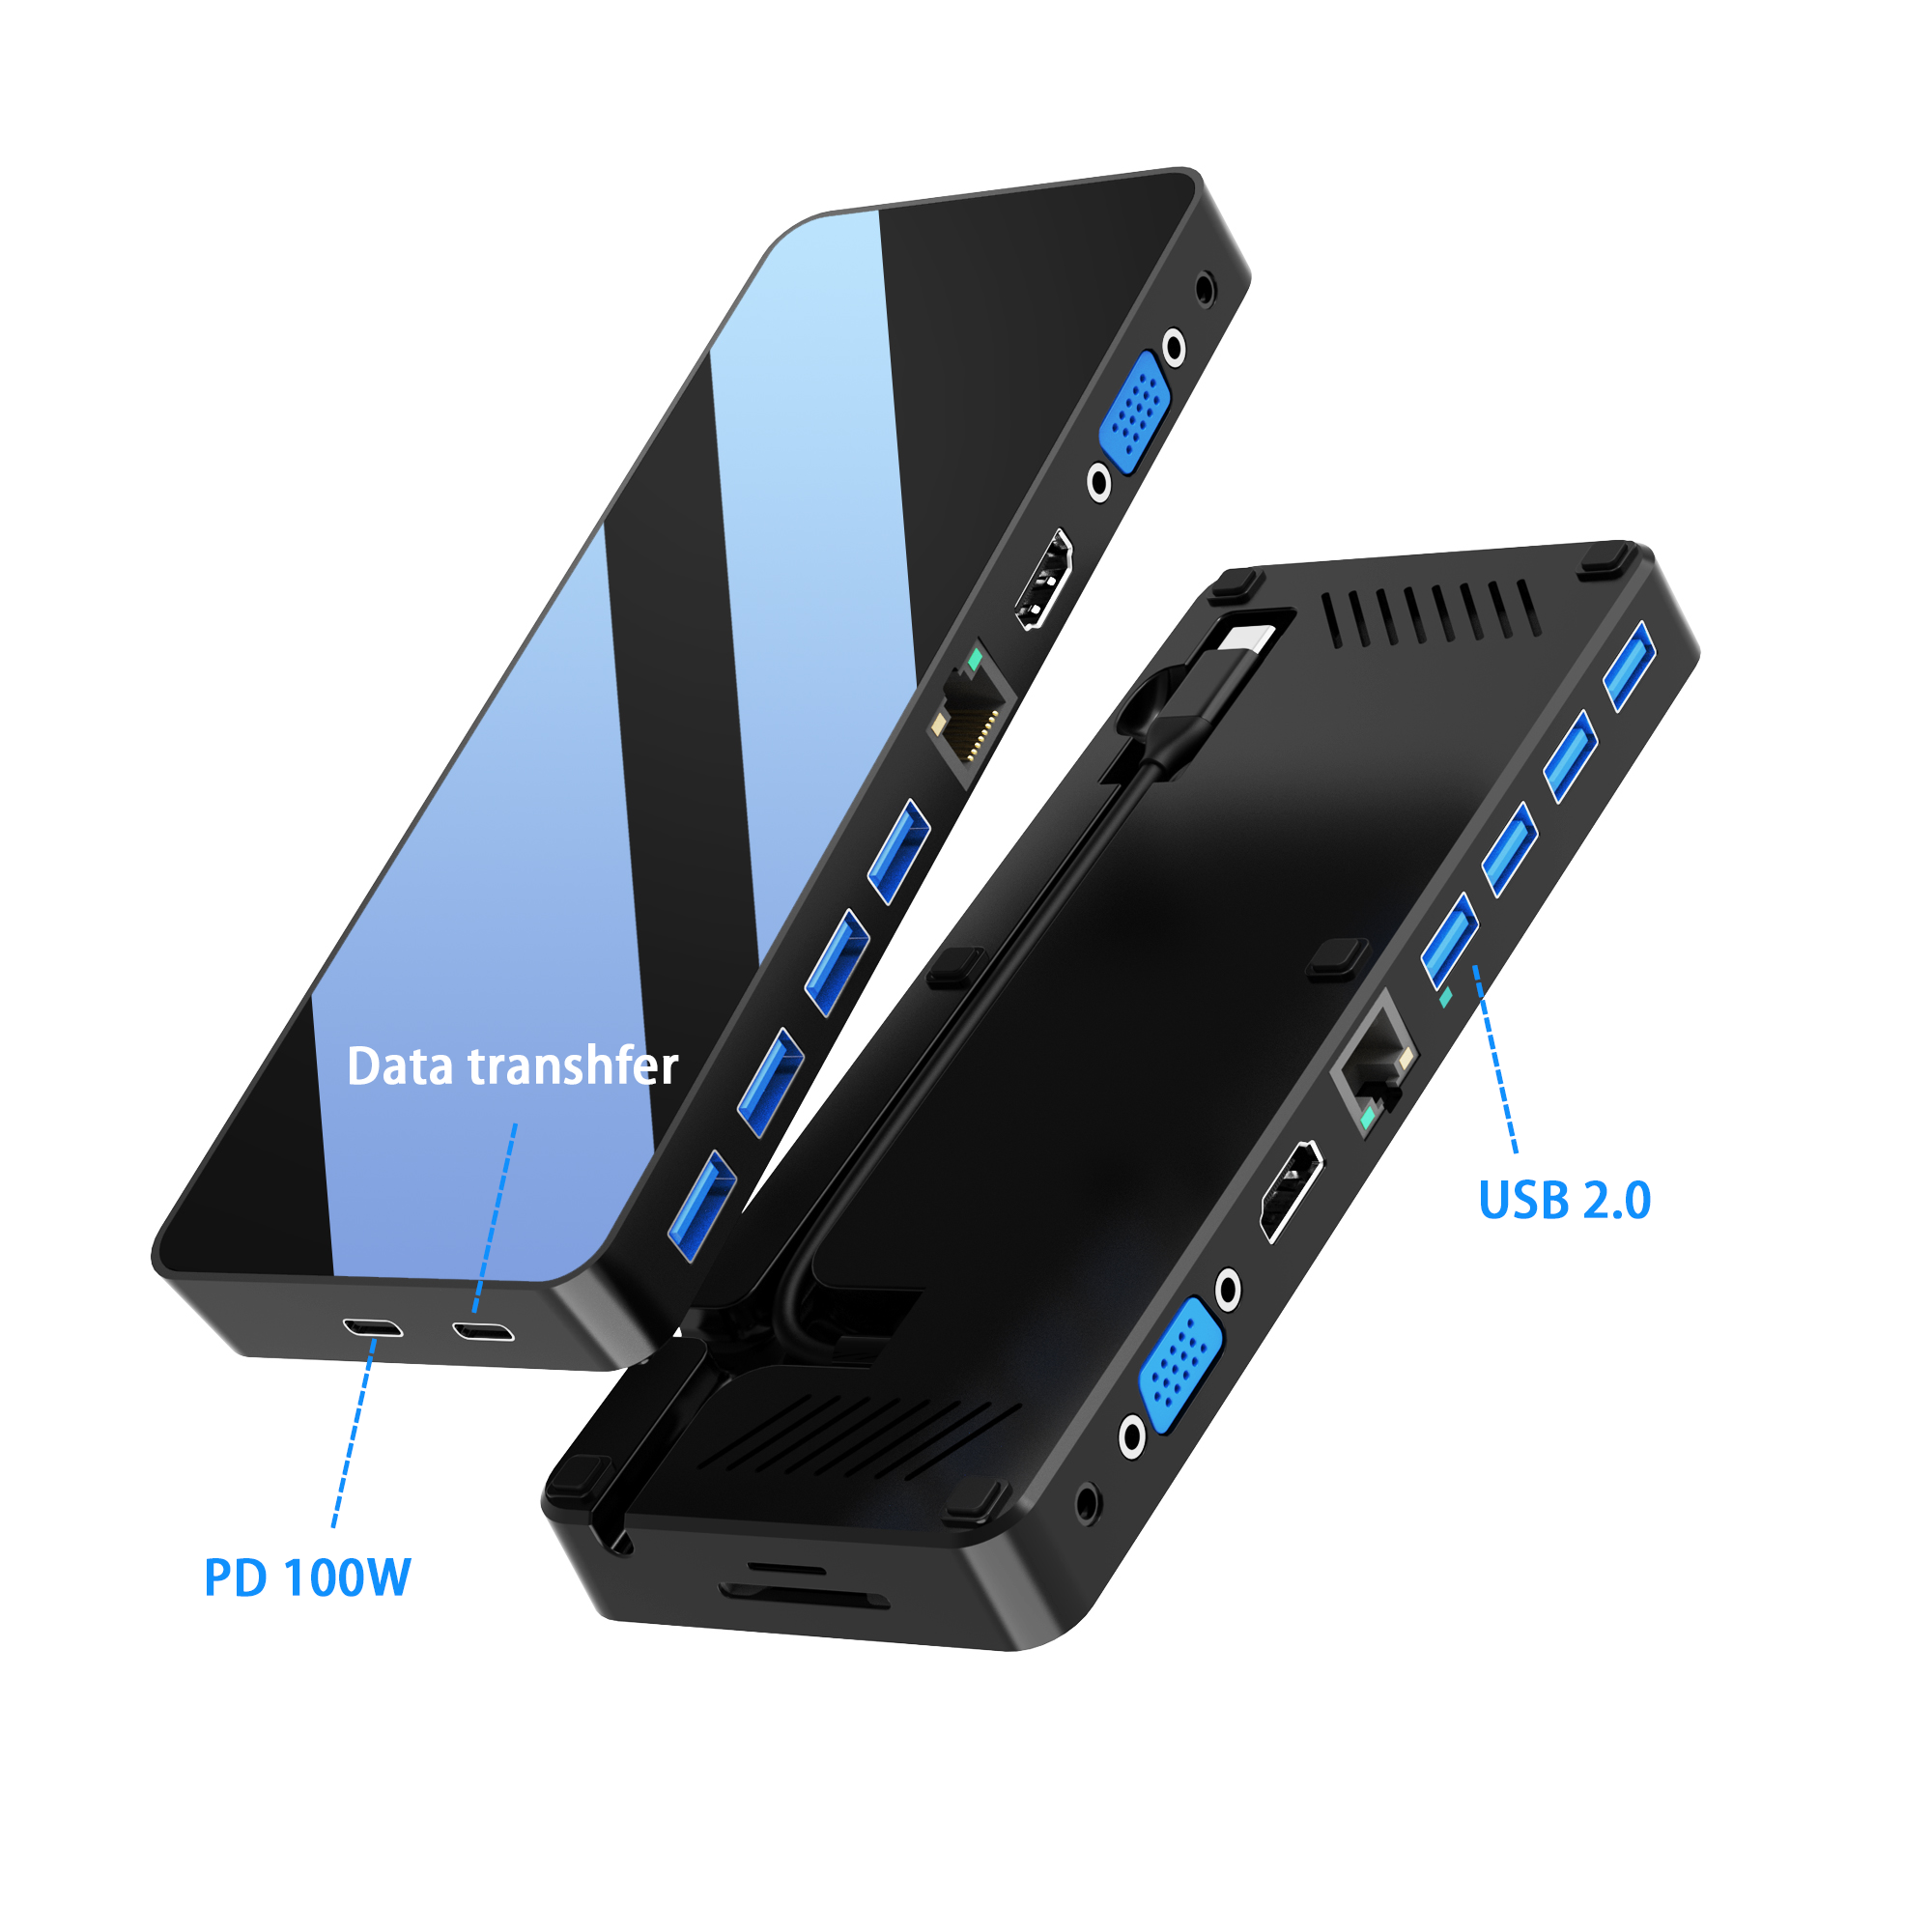 Mirror face 12 port usb c hub with 2HDMI 4K + VGA + PD 100W + Type C Data + 3xUSB A 3.0 + USB A 2.0 + RJ45 1000Mbps + 3.5mm Audio + SD+TF card slot 12 in 1 multiport dock